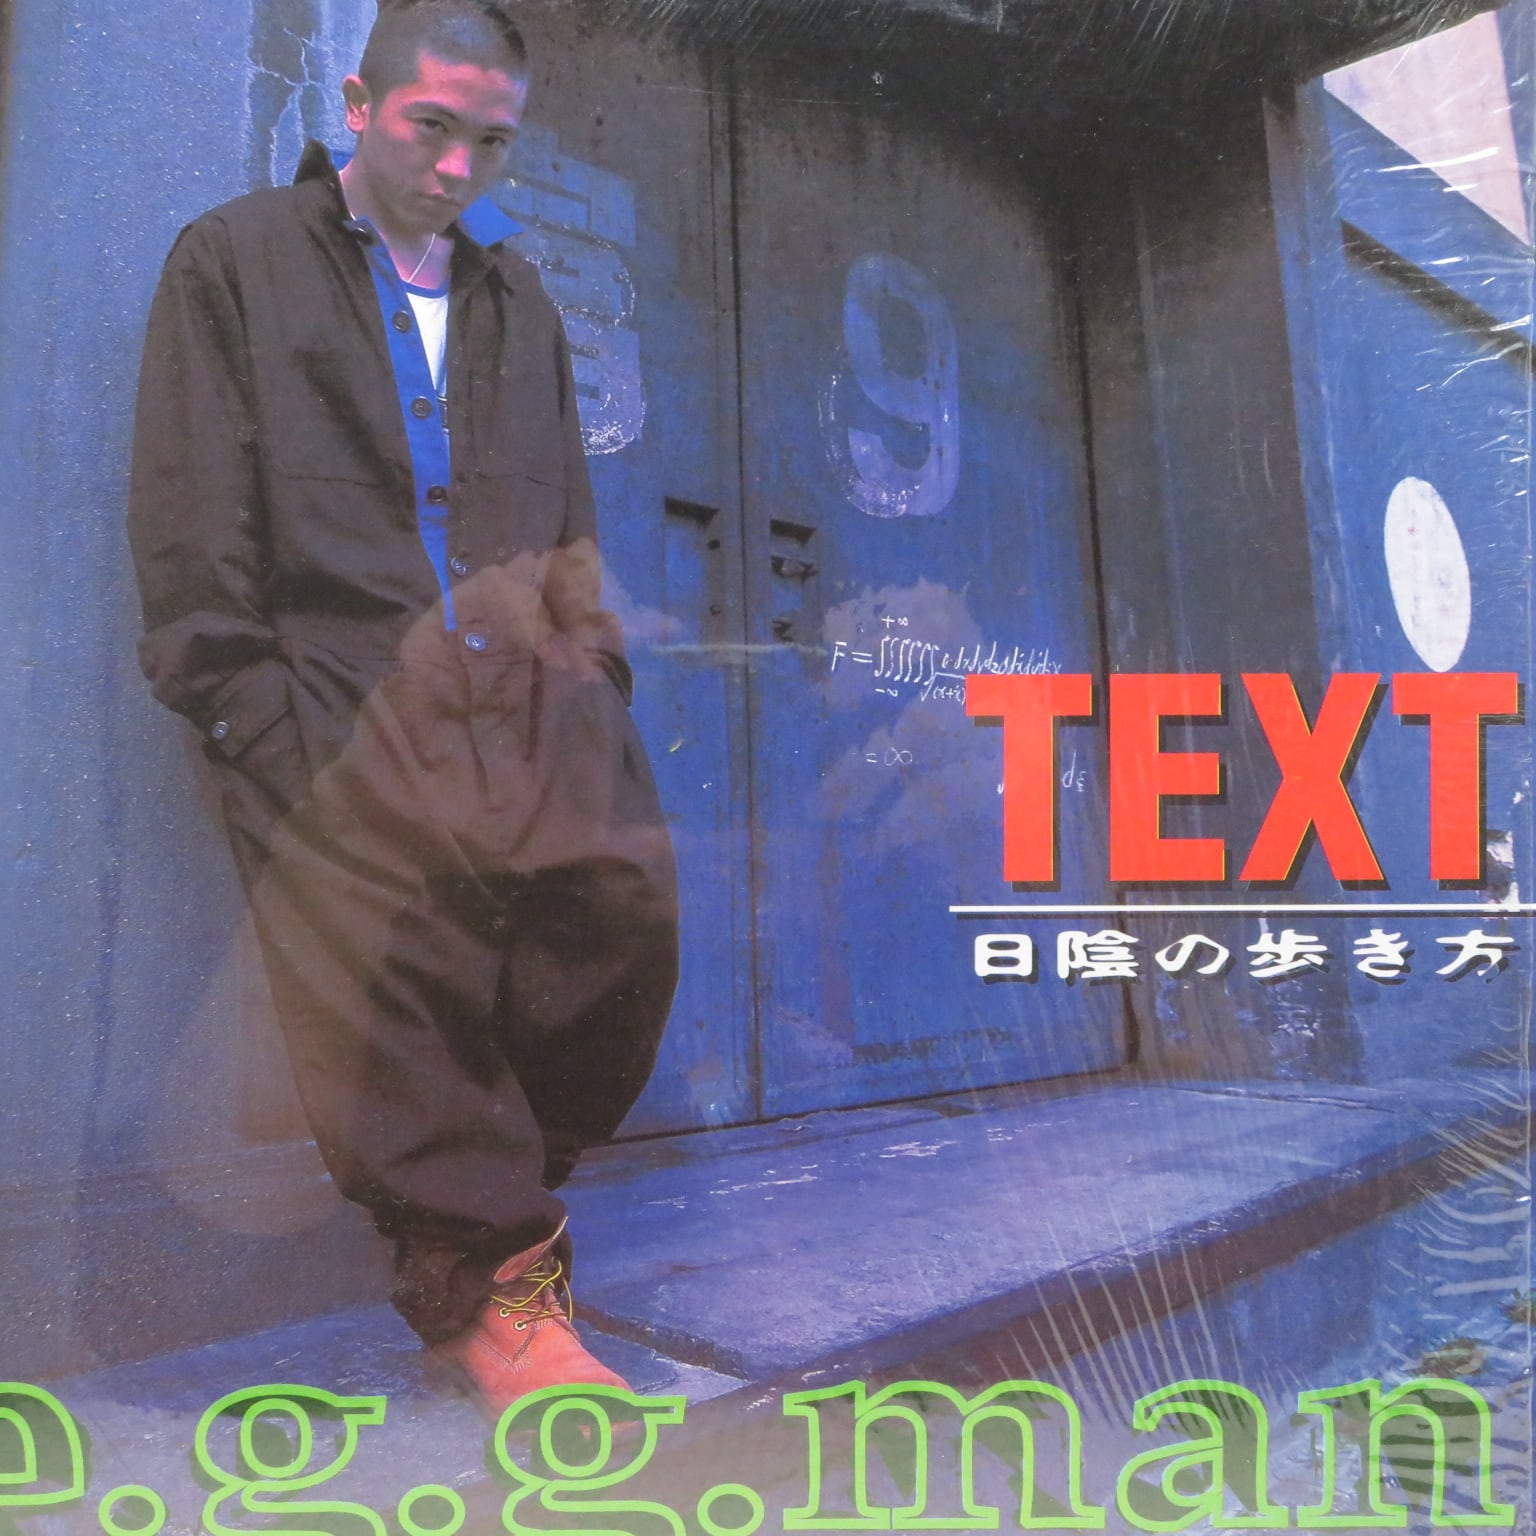 E.G.G. Man / Text: 日陰の歩き方 = Text: How To Walk In The Dark Side [MJ-0020] - 画像1